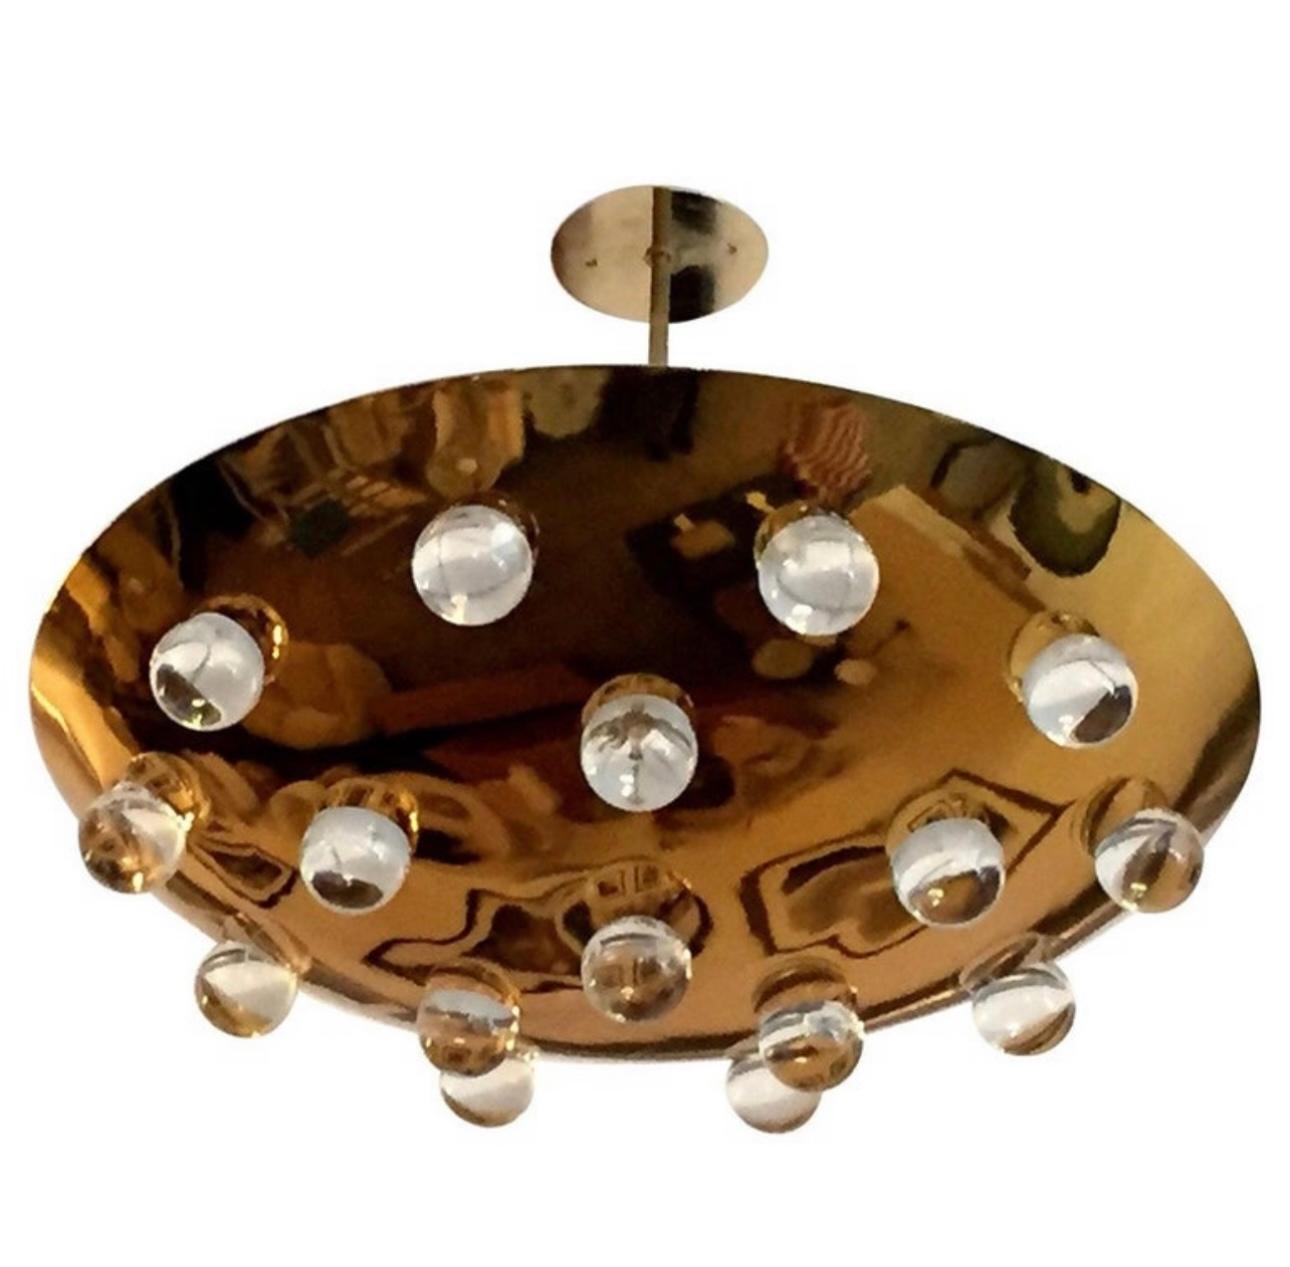 A wonderful pair of 1960s French golden solid polished  brass round disc fixture with 16 solid glass orbs. Five-light sources which emit light downward through the glass as well as up toward the ceiling. The ceiling pole can be lengthened or